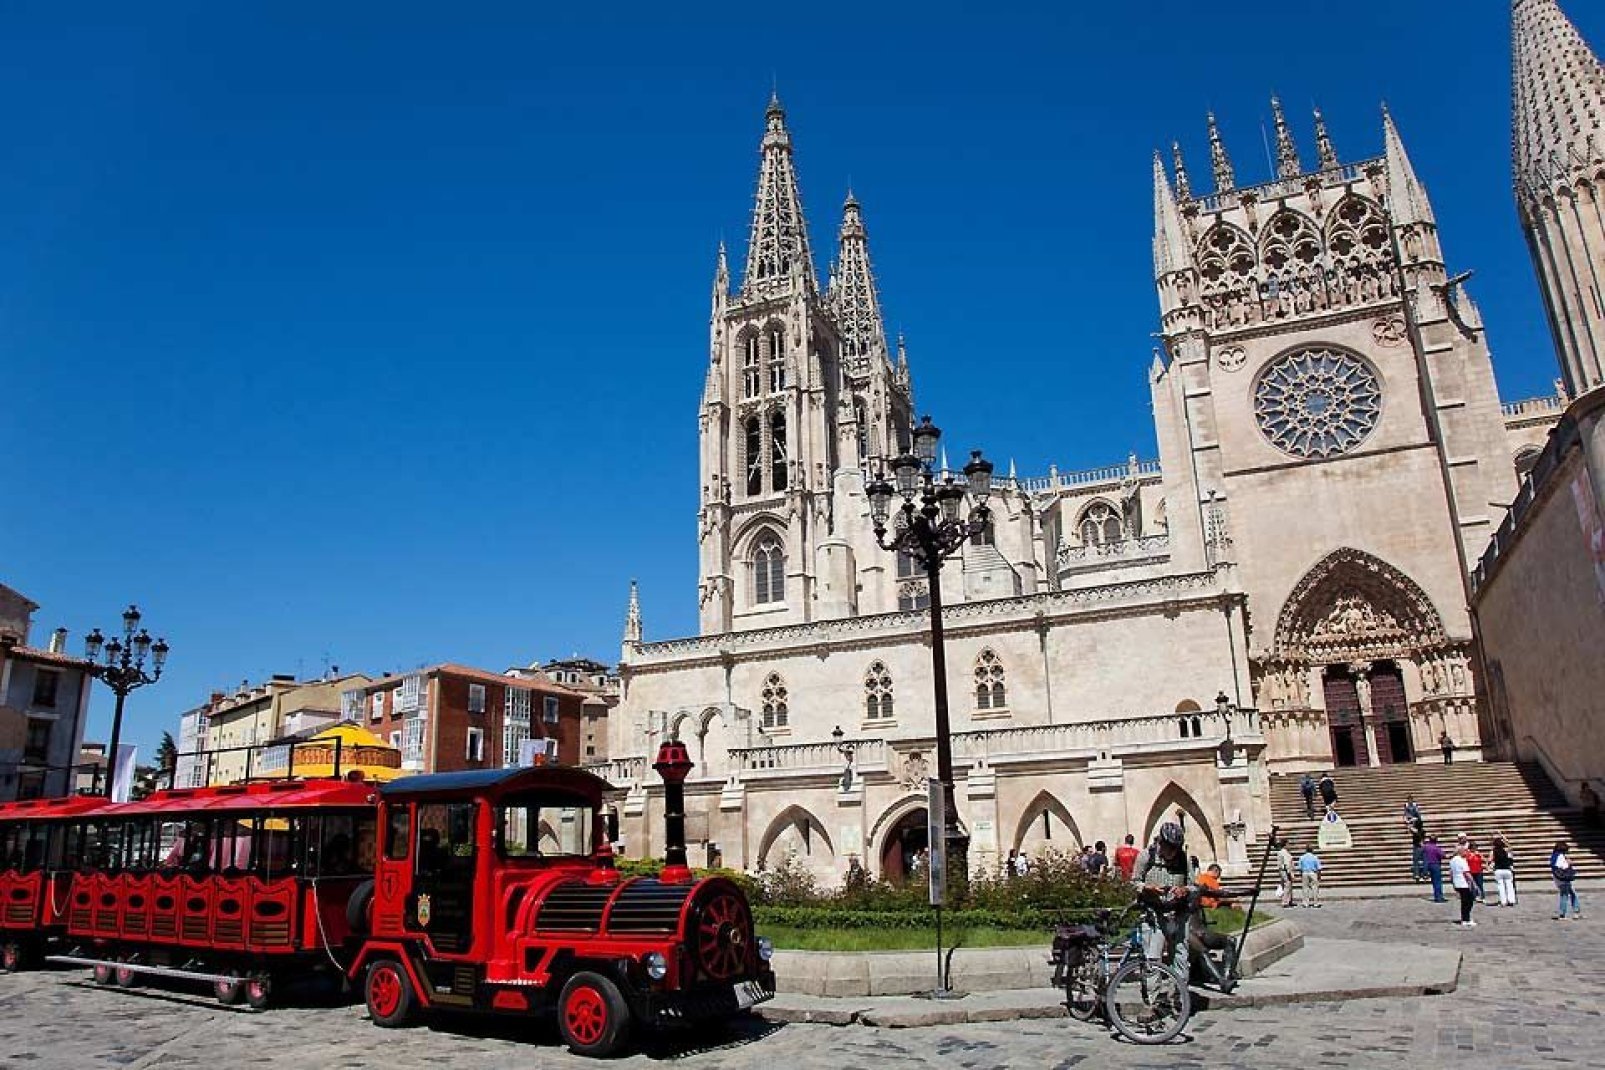 The cathedral is the main tourist attraction of Burgos